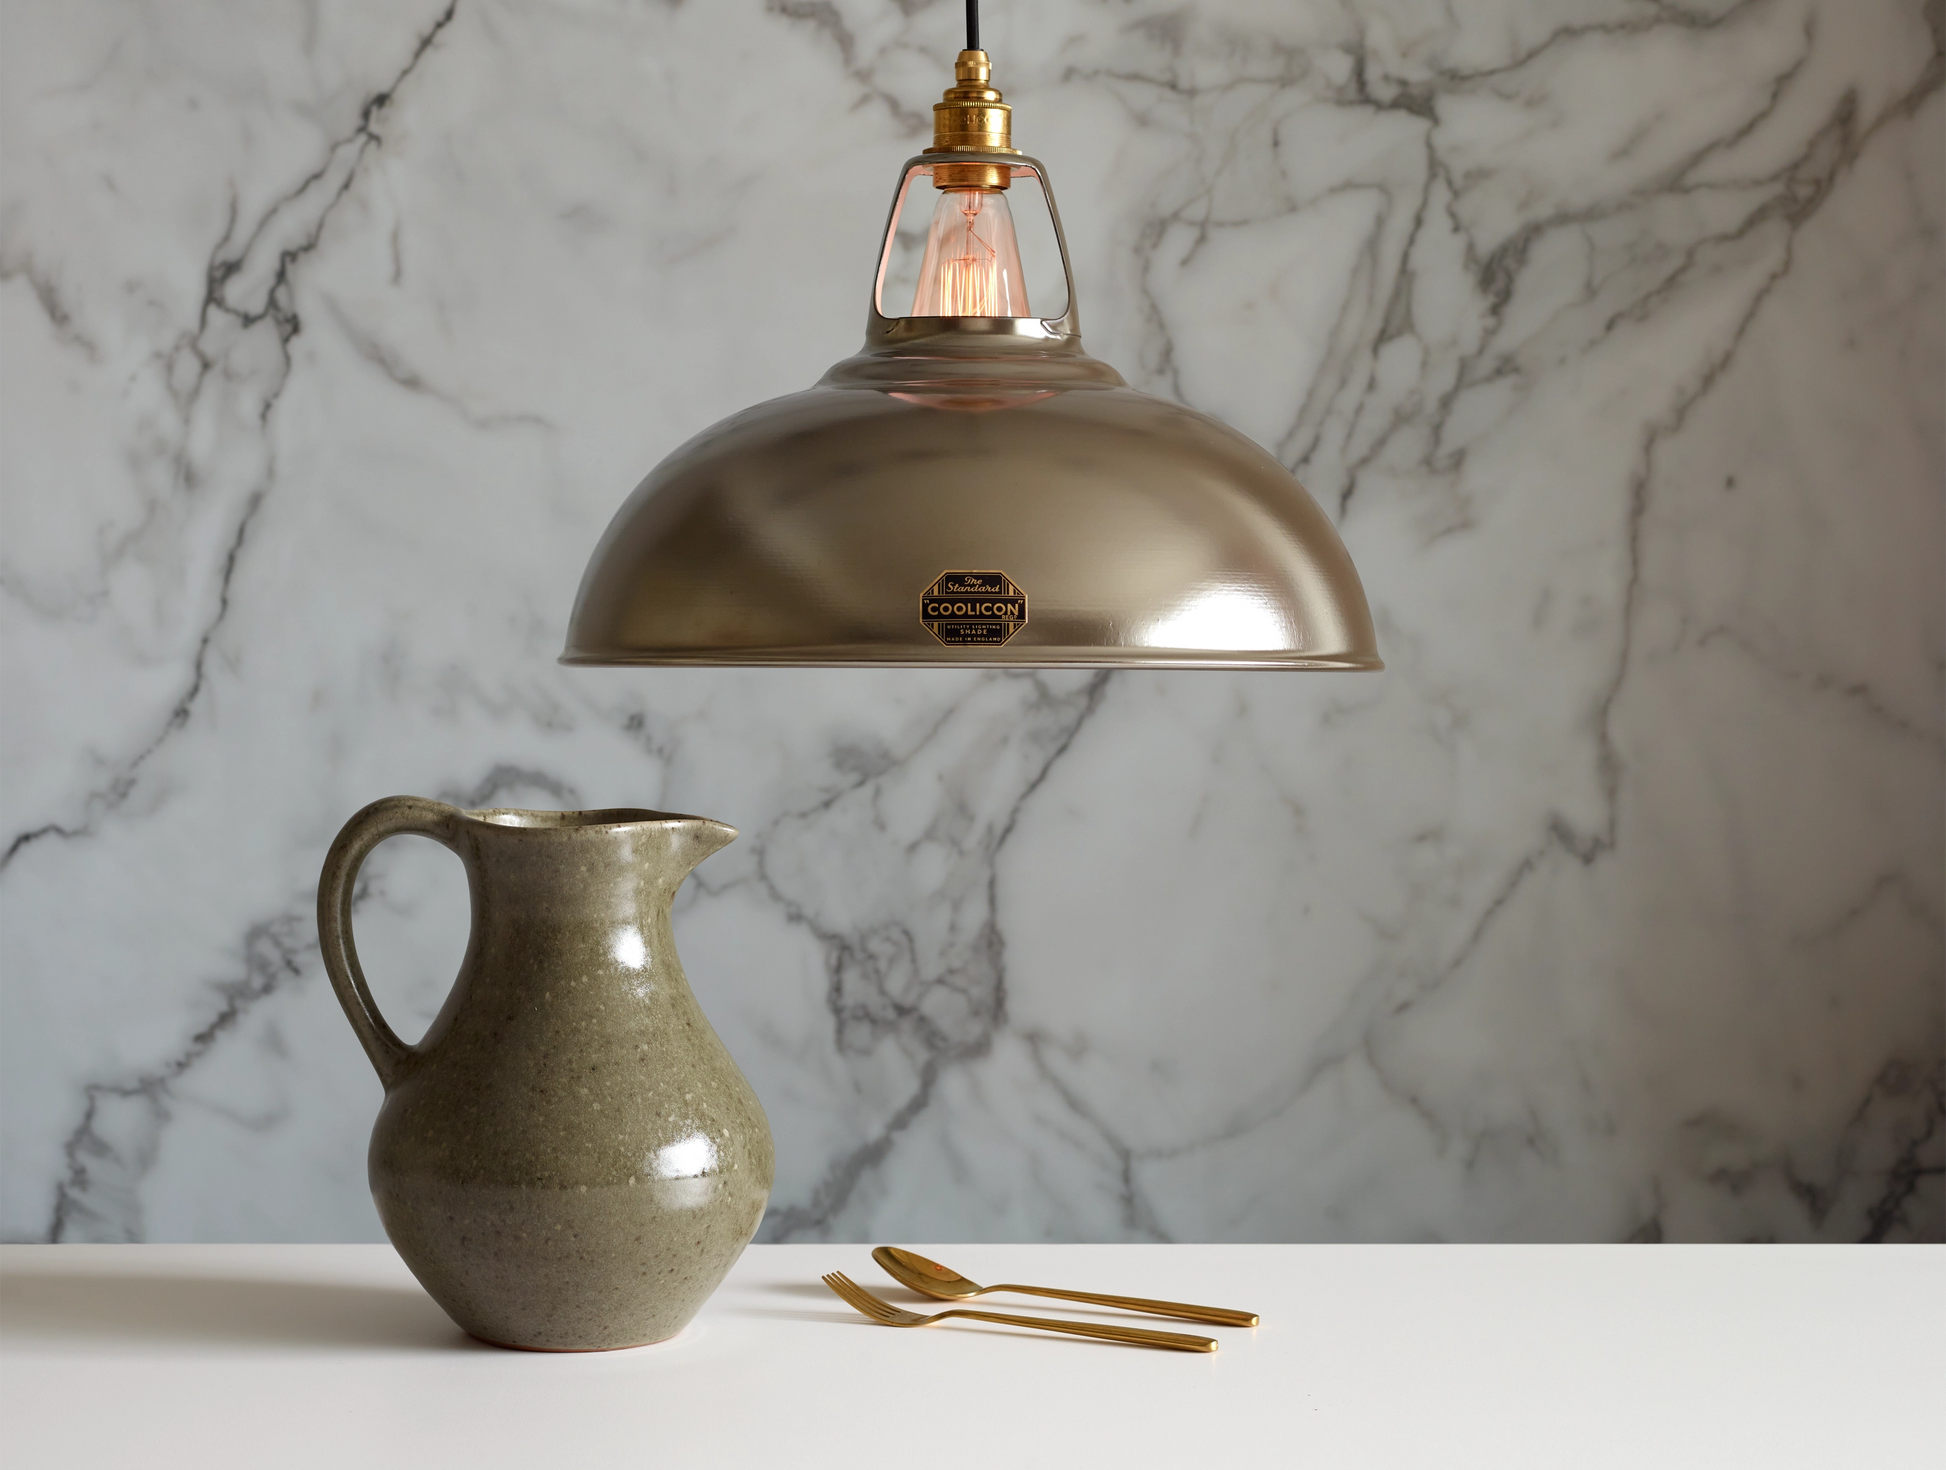 A large Antinium shade hanging over a table above a grey water jug and a golden spoon and fork. The background is a marble wallpaper